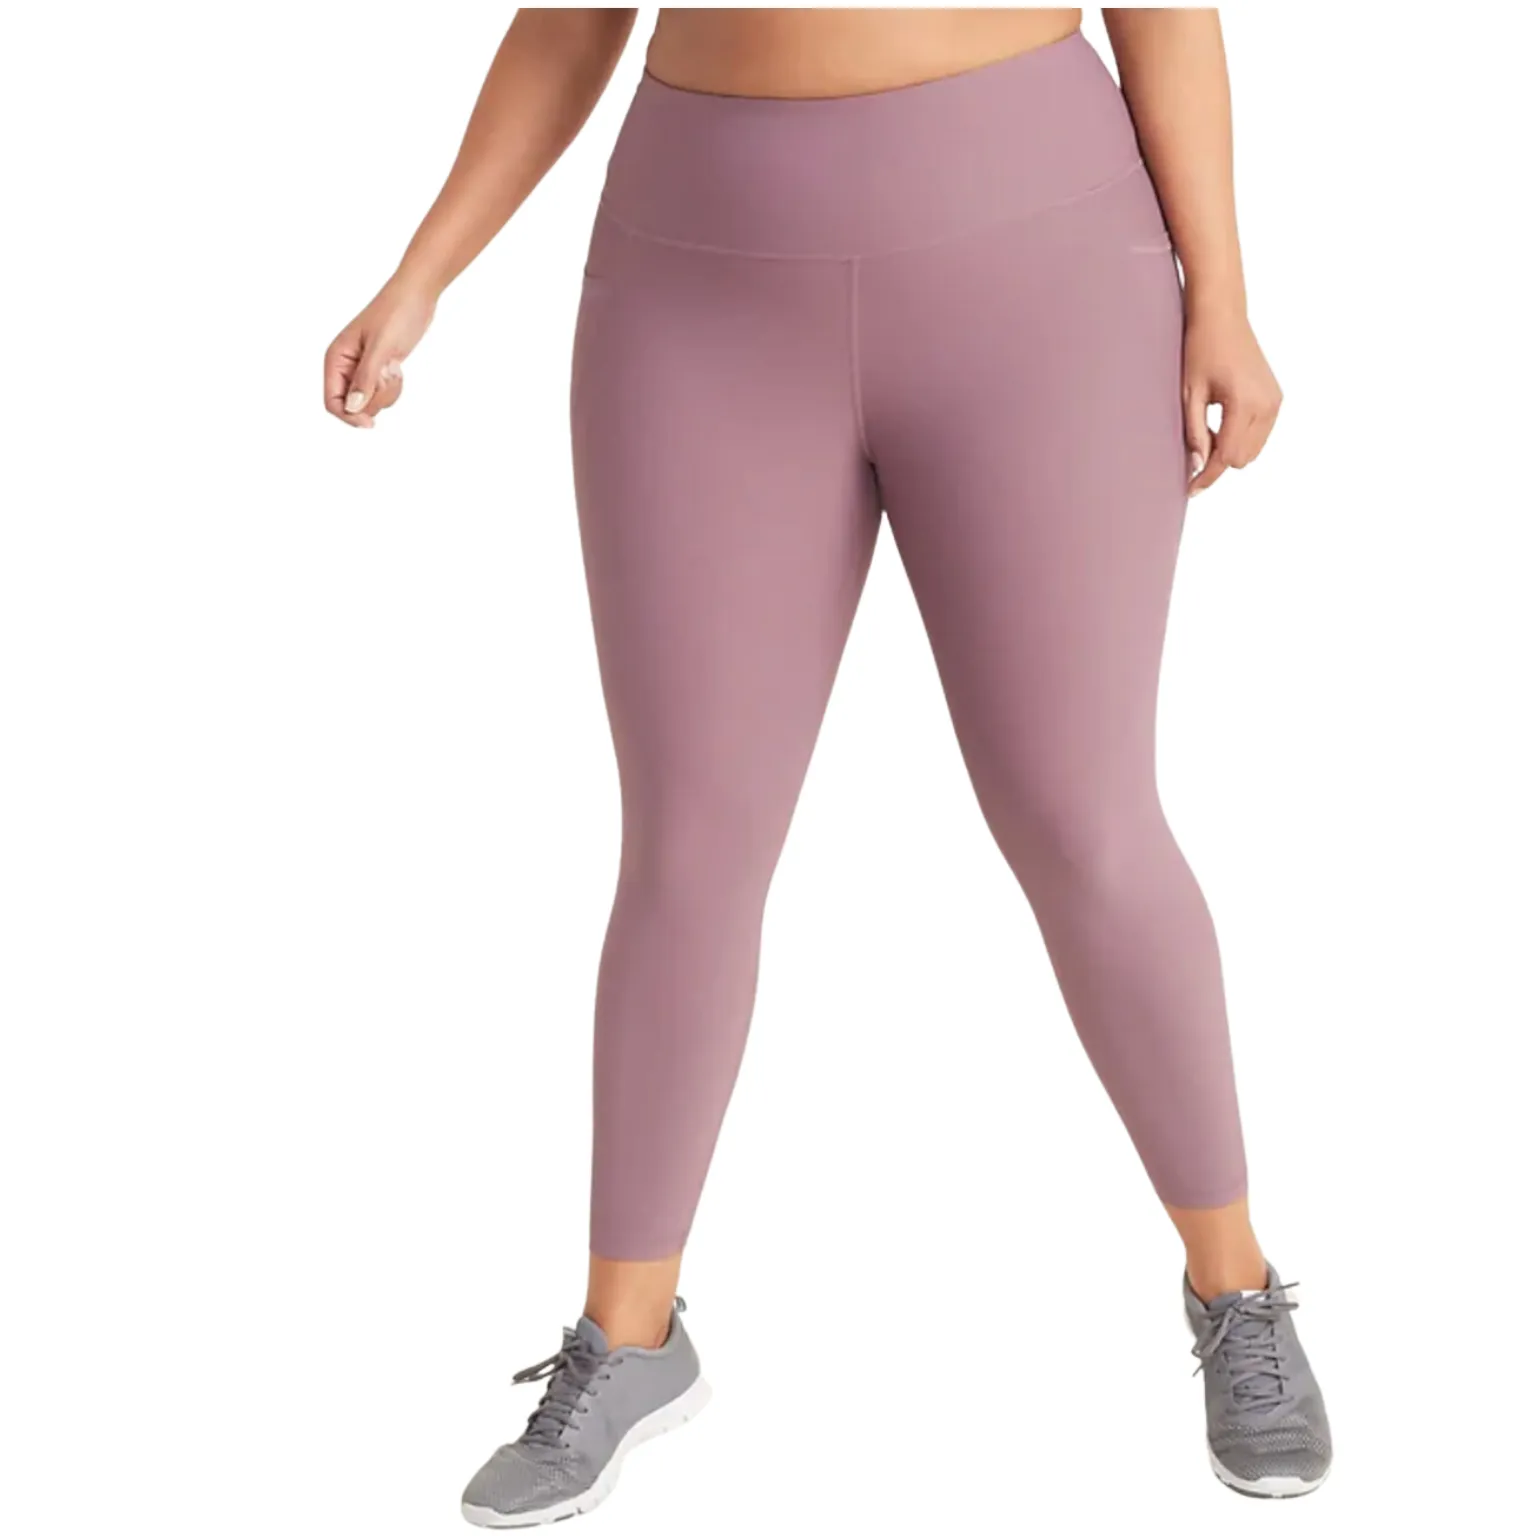 Plus Size Leggings manufacturing with superior quality.